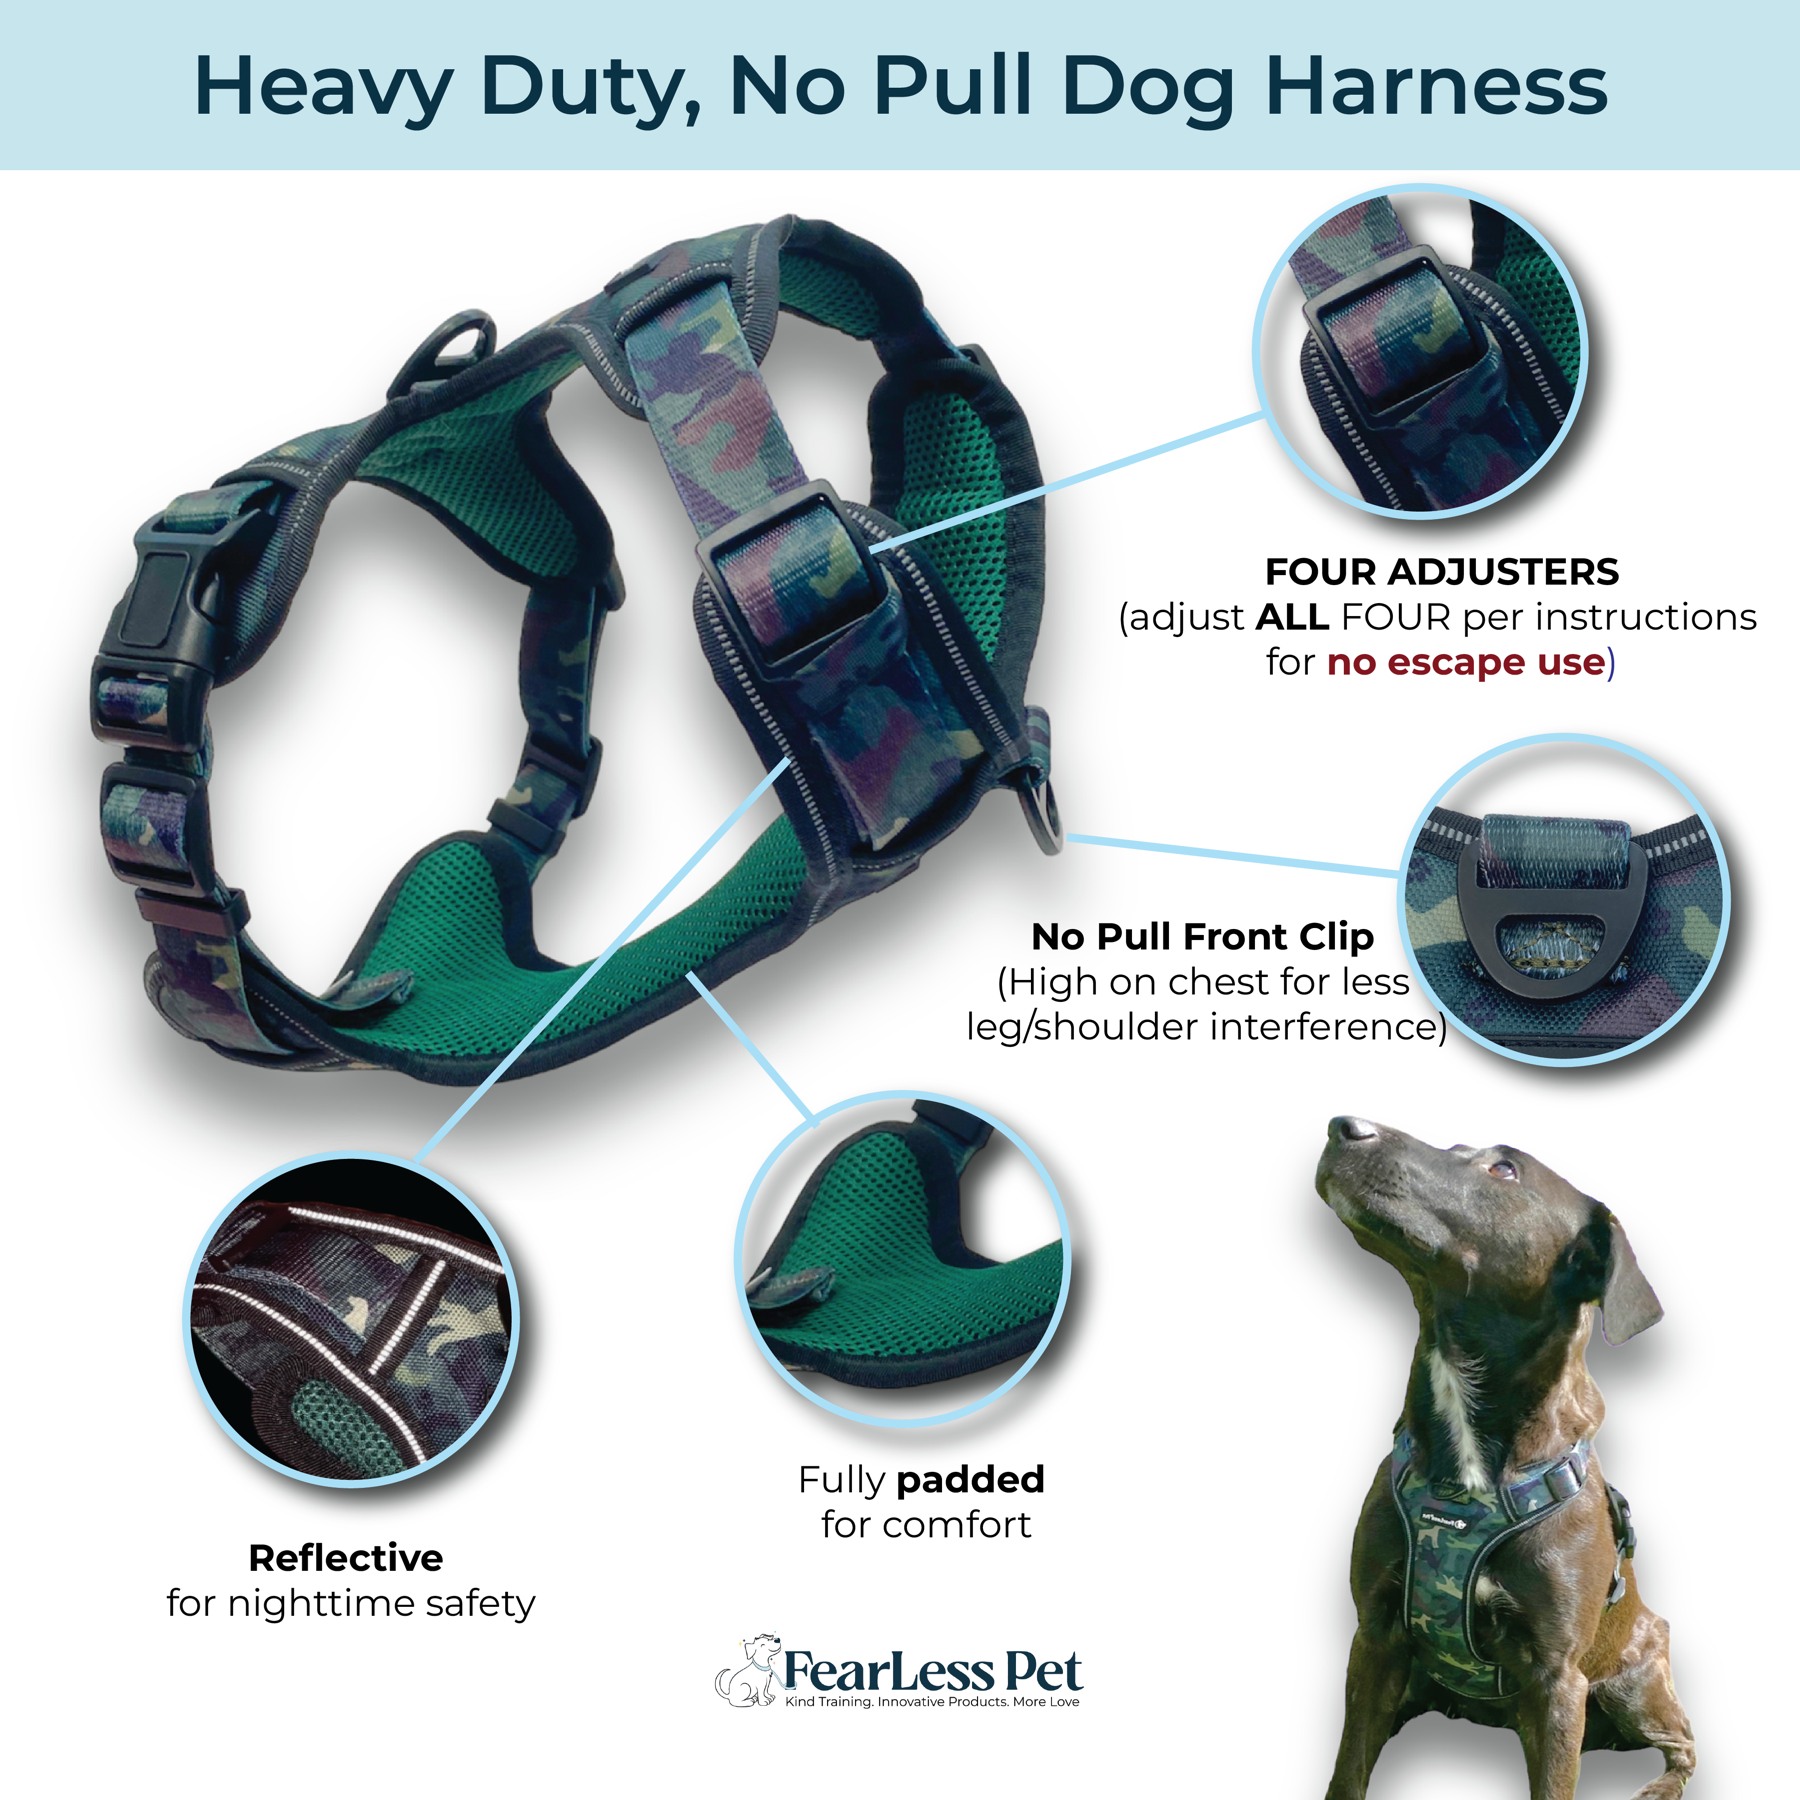 an infographic for a medium large puppy harness from fearless pet the harness is escape proof and no pull for puppies and adult dogs weighing 35 lbs and up